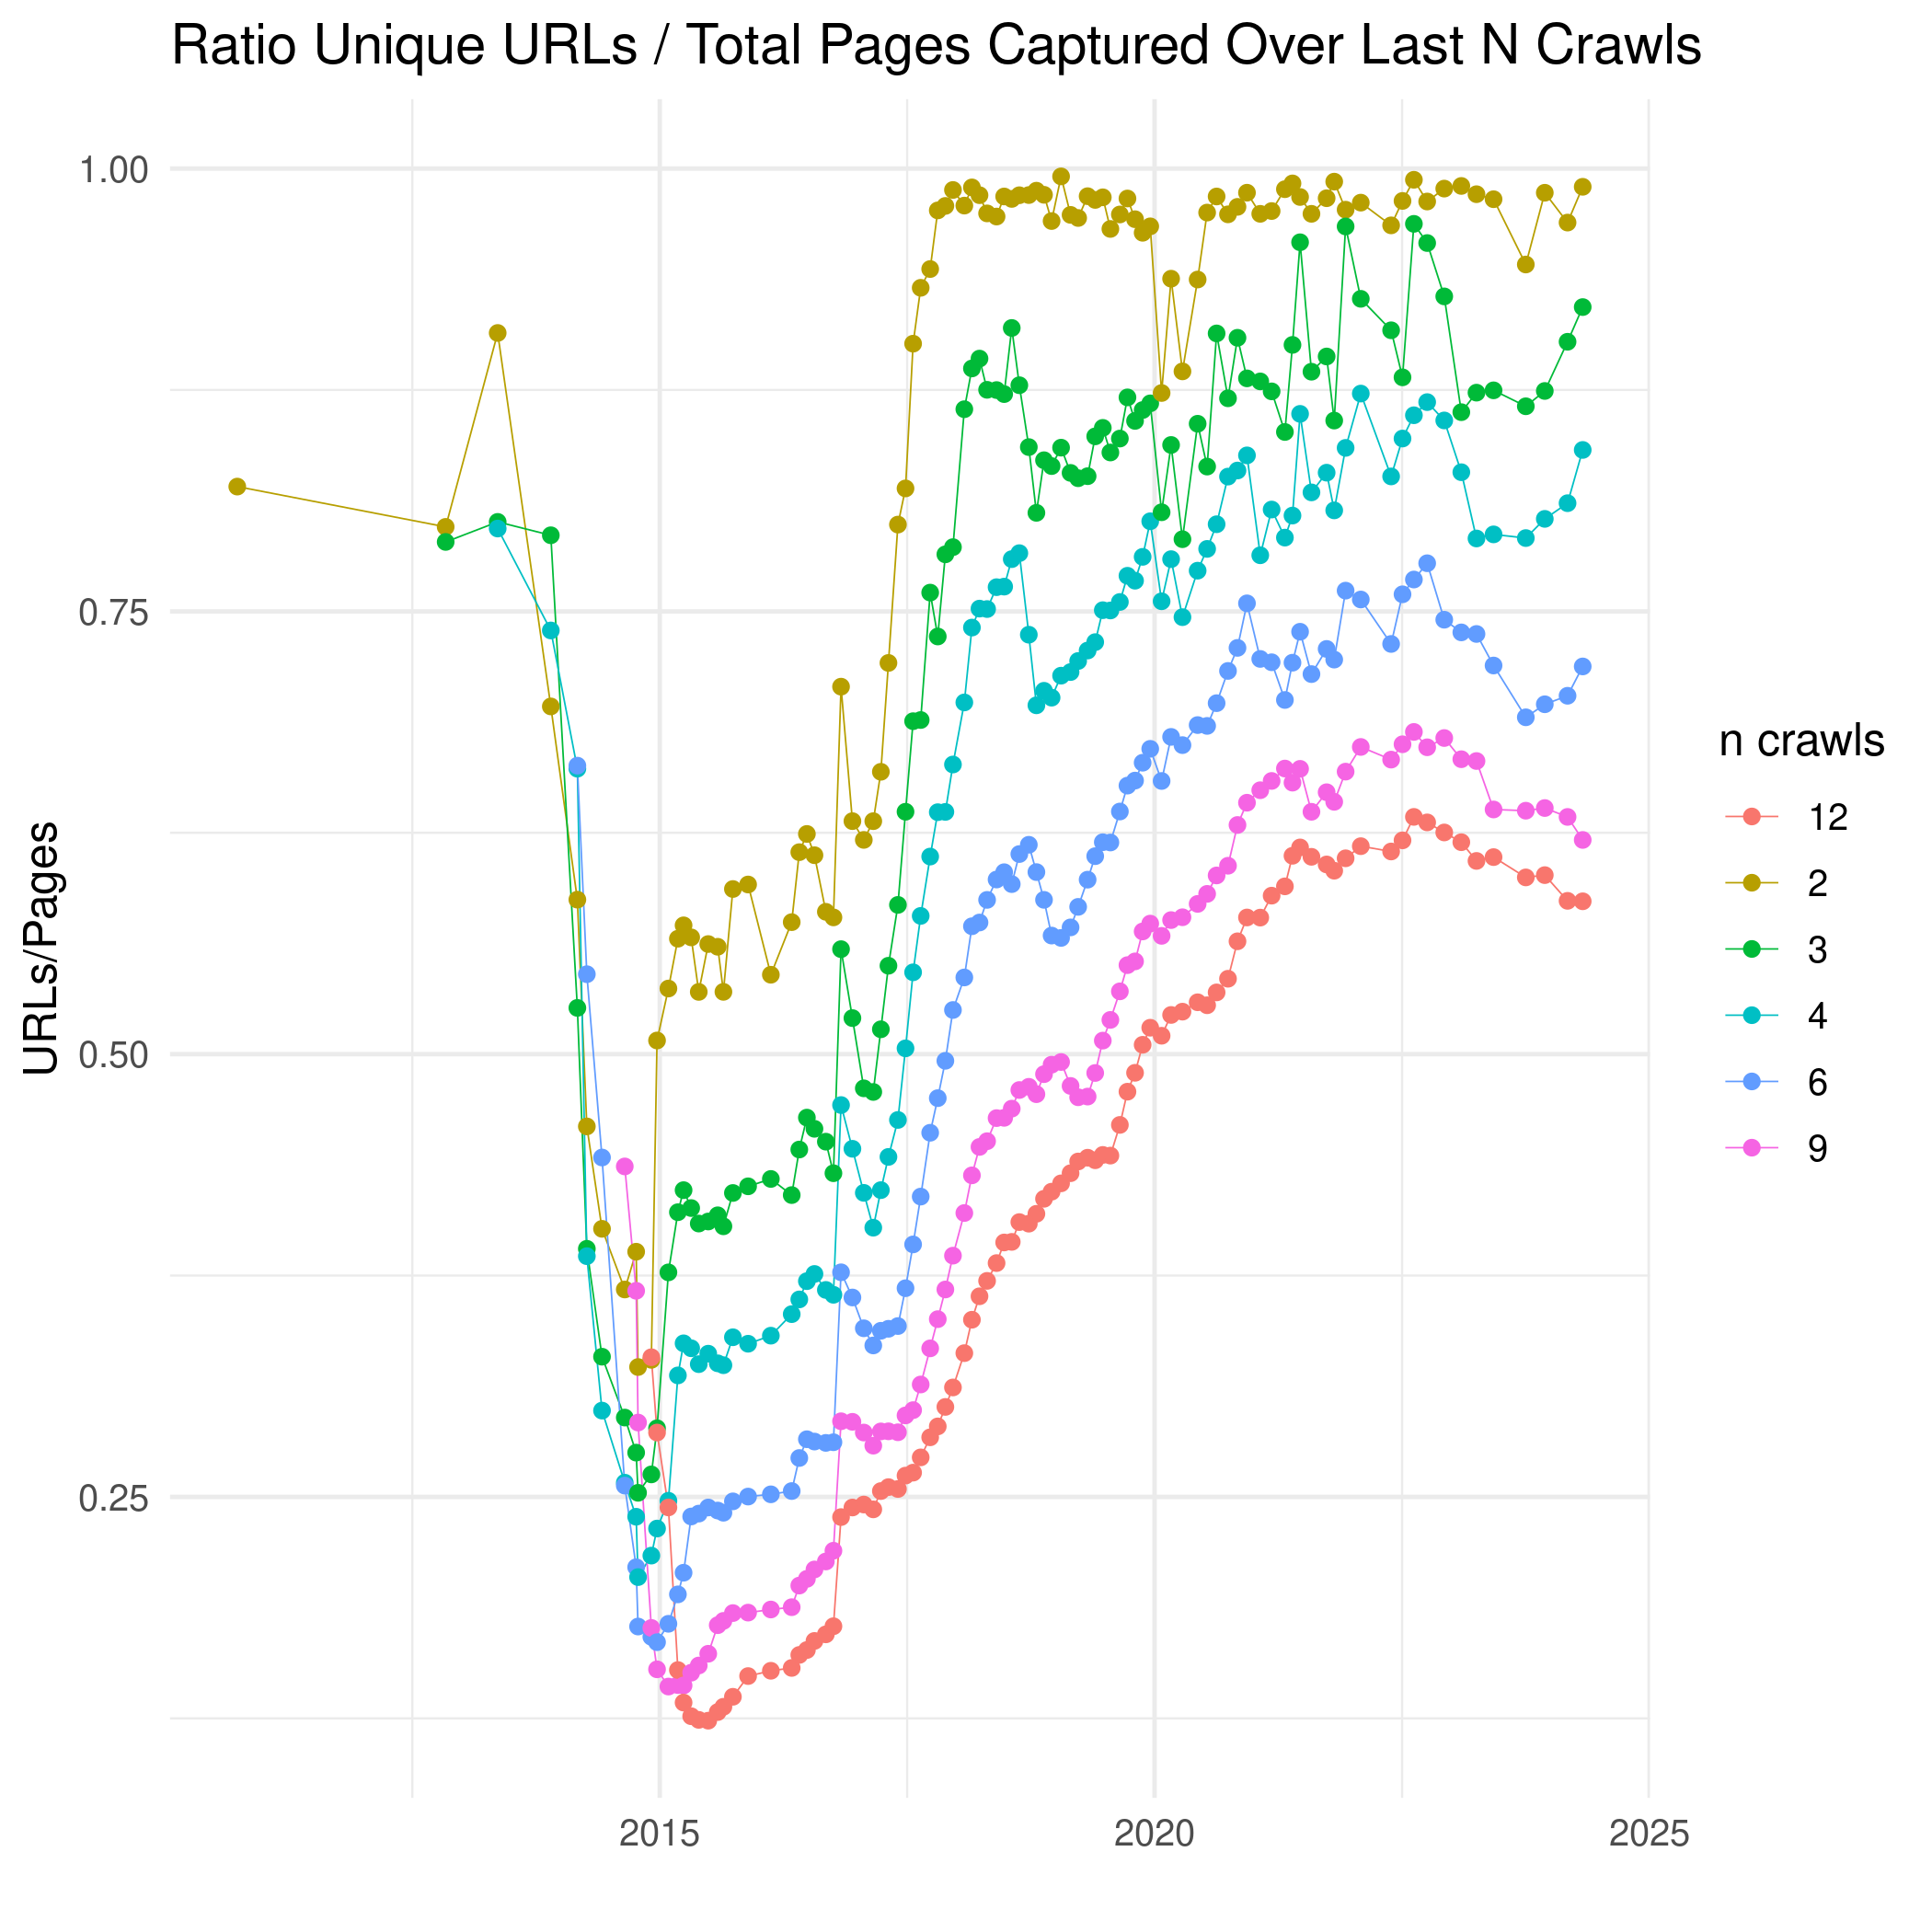 Ratio of unique URLs by total pages captured over n last crawls